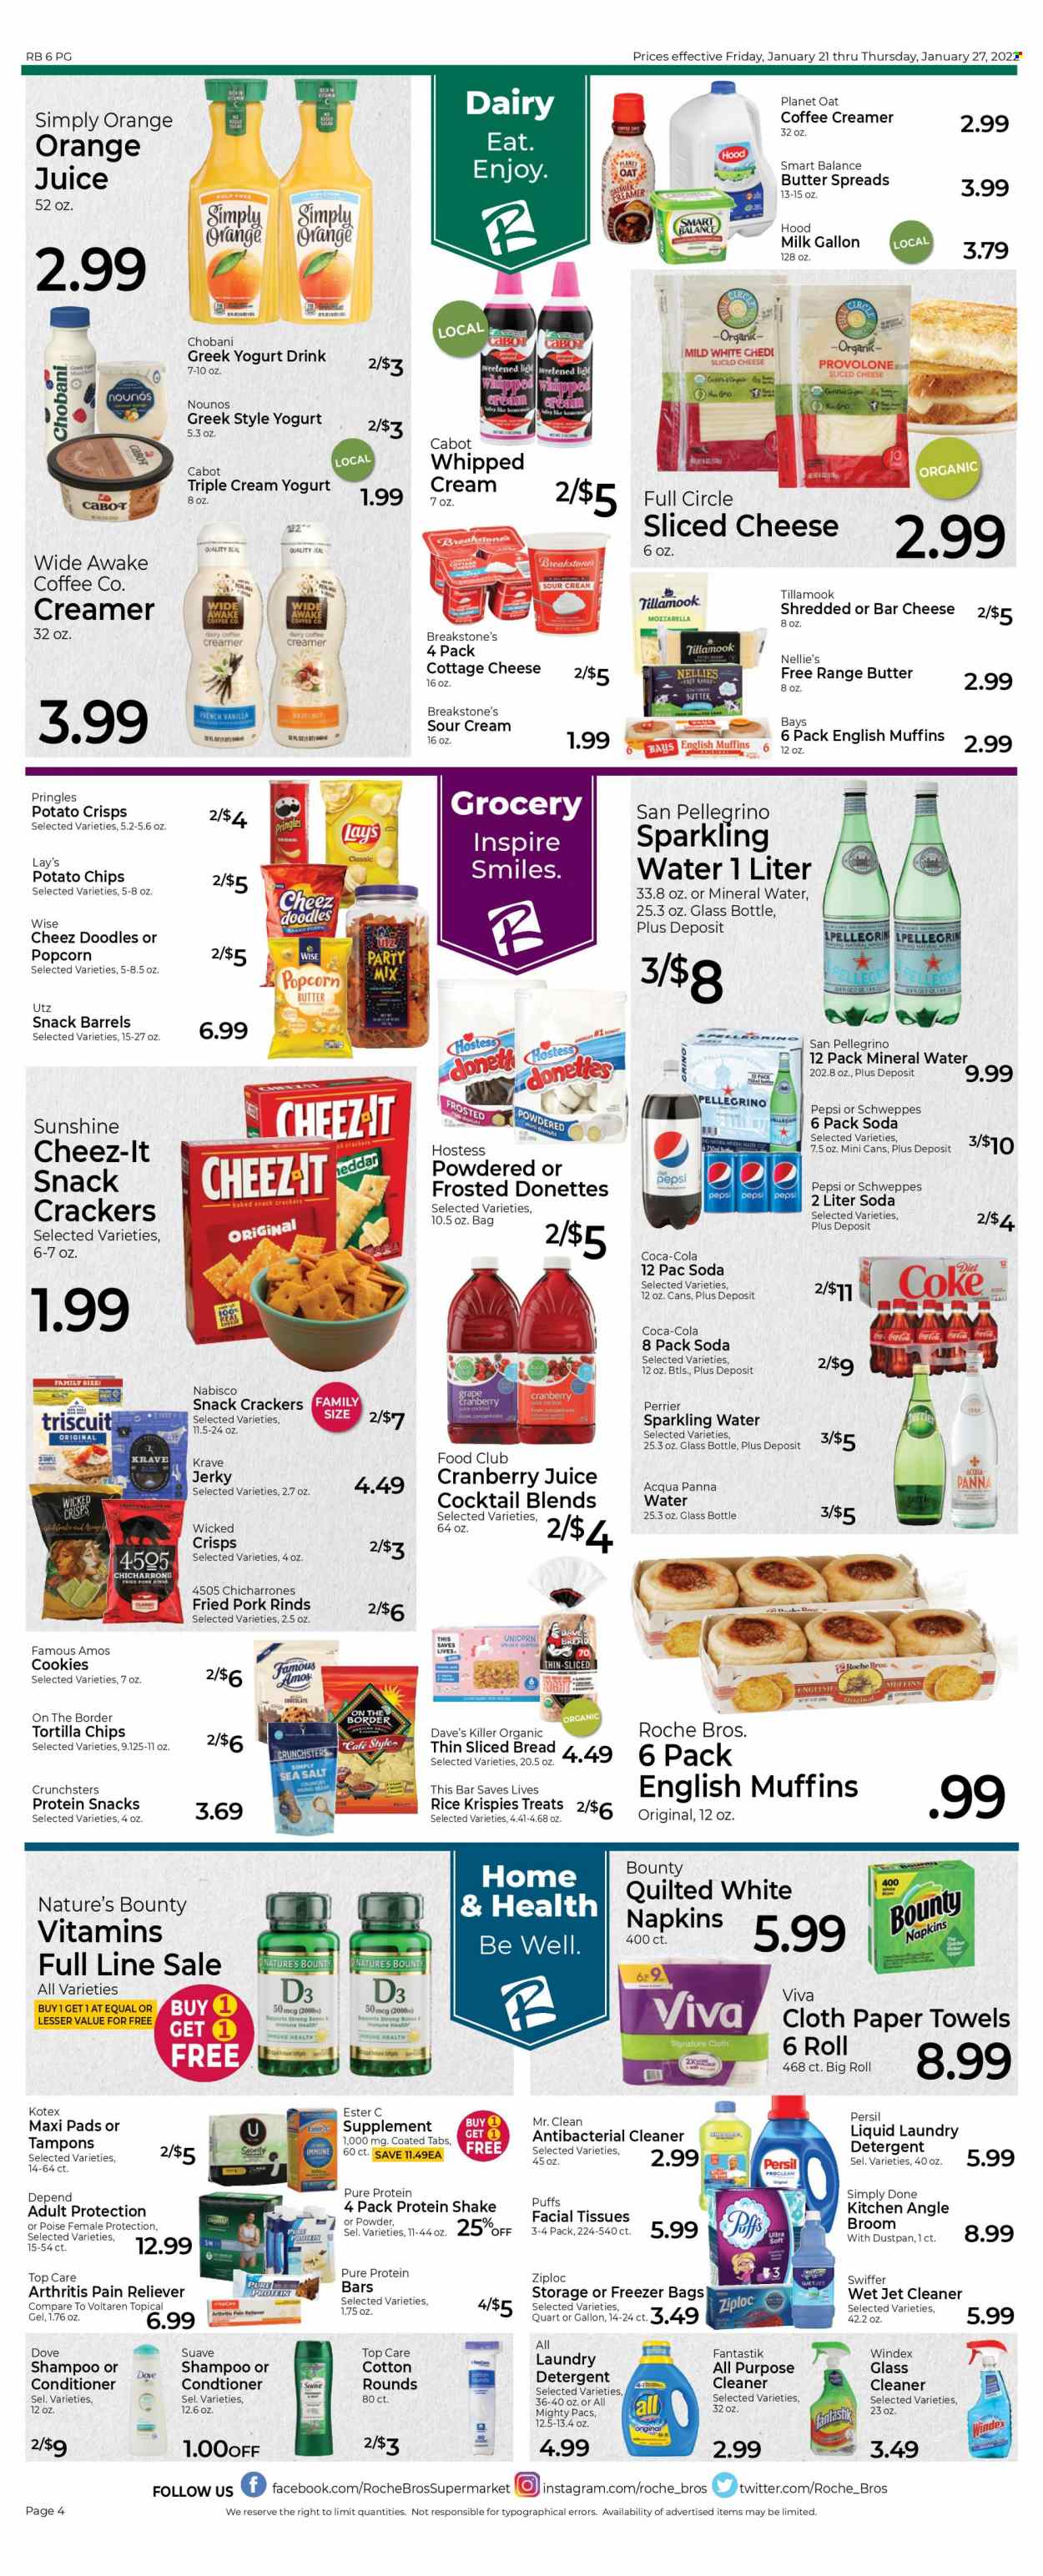 thumbnail - Roche Bros. Flyer - 01/21/2022 - 01/27/2022 - Sales products - bread, english muffins, puffs, donut, jerky, cottage cheese, mozzarella, sliced cheese, cheese, greek yoghurt, yoghurt, Chobani, milk, protein drink, yoghurt drink, shake, butter, Sunshine, sour cream, whipped cream, creamer, cookies, chocolate, snack, crackers, tortilla chips, potato crisps, potato chips, Pringles, chips, Lay’s, popcorn, Cheez-It, oats, protein bar, Rice Krispies, Coca-Cola, cranberry juice, Schweppes, Pepsi, orange juice, juice, Diet Pepsi, Perrier, mineral water, soda, sparkling water, San Pellegrino, napkins, tissues, kitchen towels, paper towels, detergent, Windex, cleaner, all purpose cleaner, glass cleaner, Swiffer, Persil, Jet, Dove, shampoo, Suave, sanitary pads, Kotex, tampons, facial tissues, conditioner, Ziploc, Nature's Bounty, vitamin D3. Page 4.